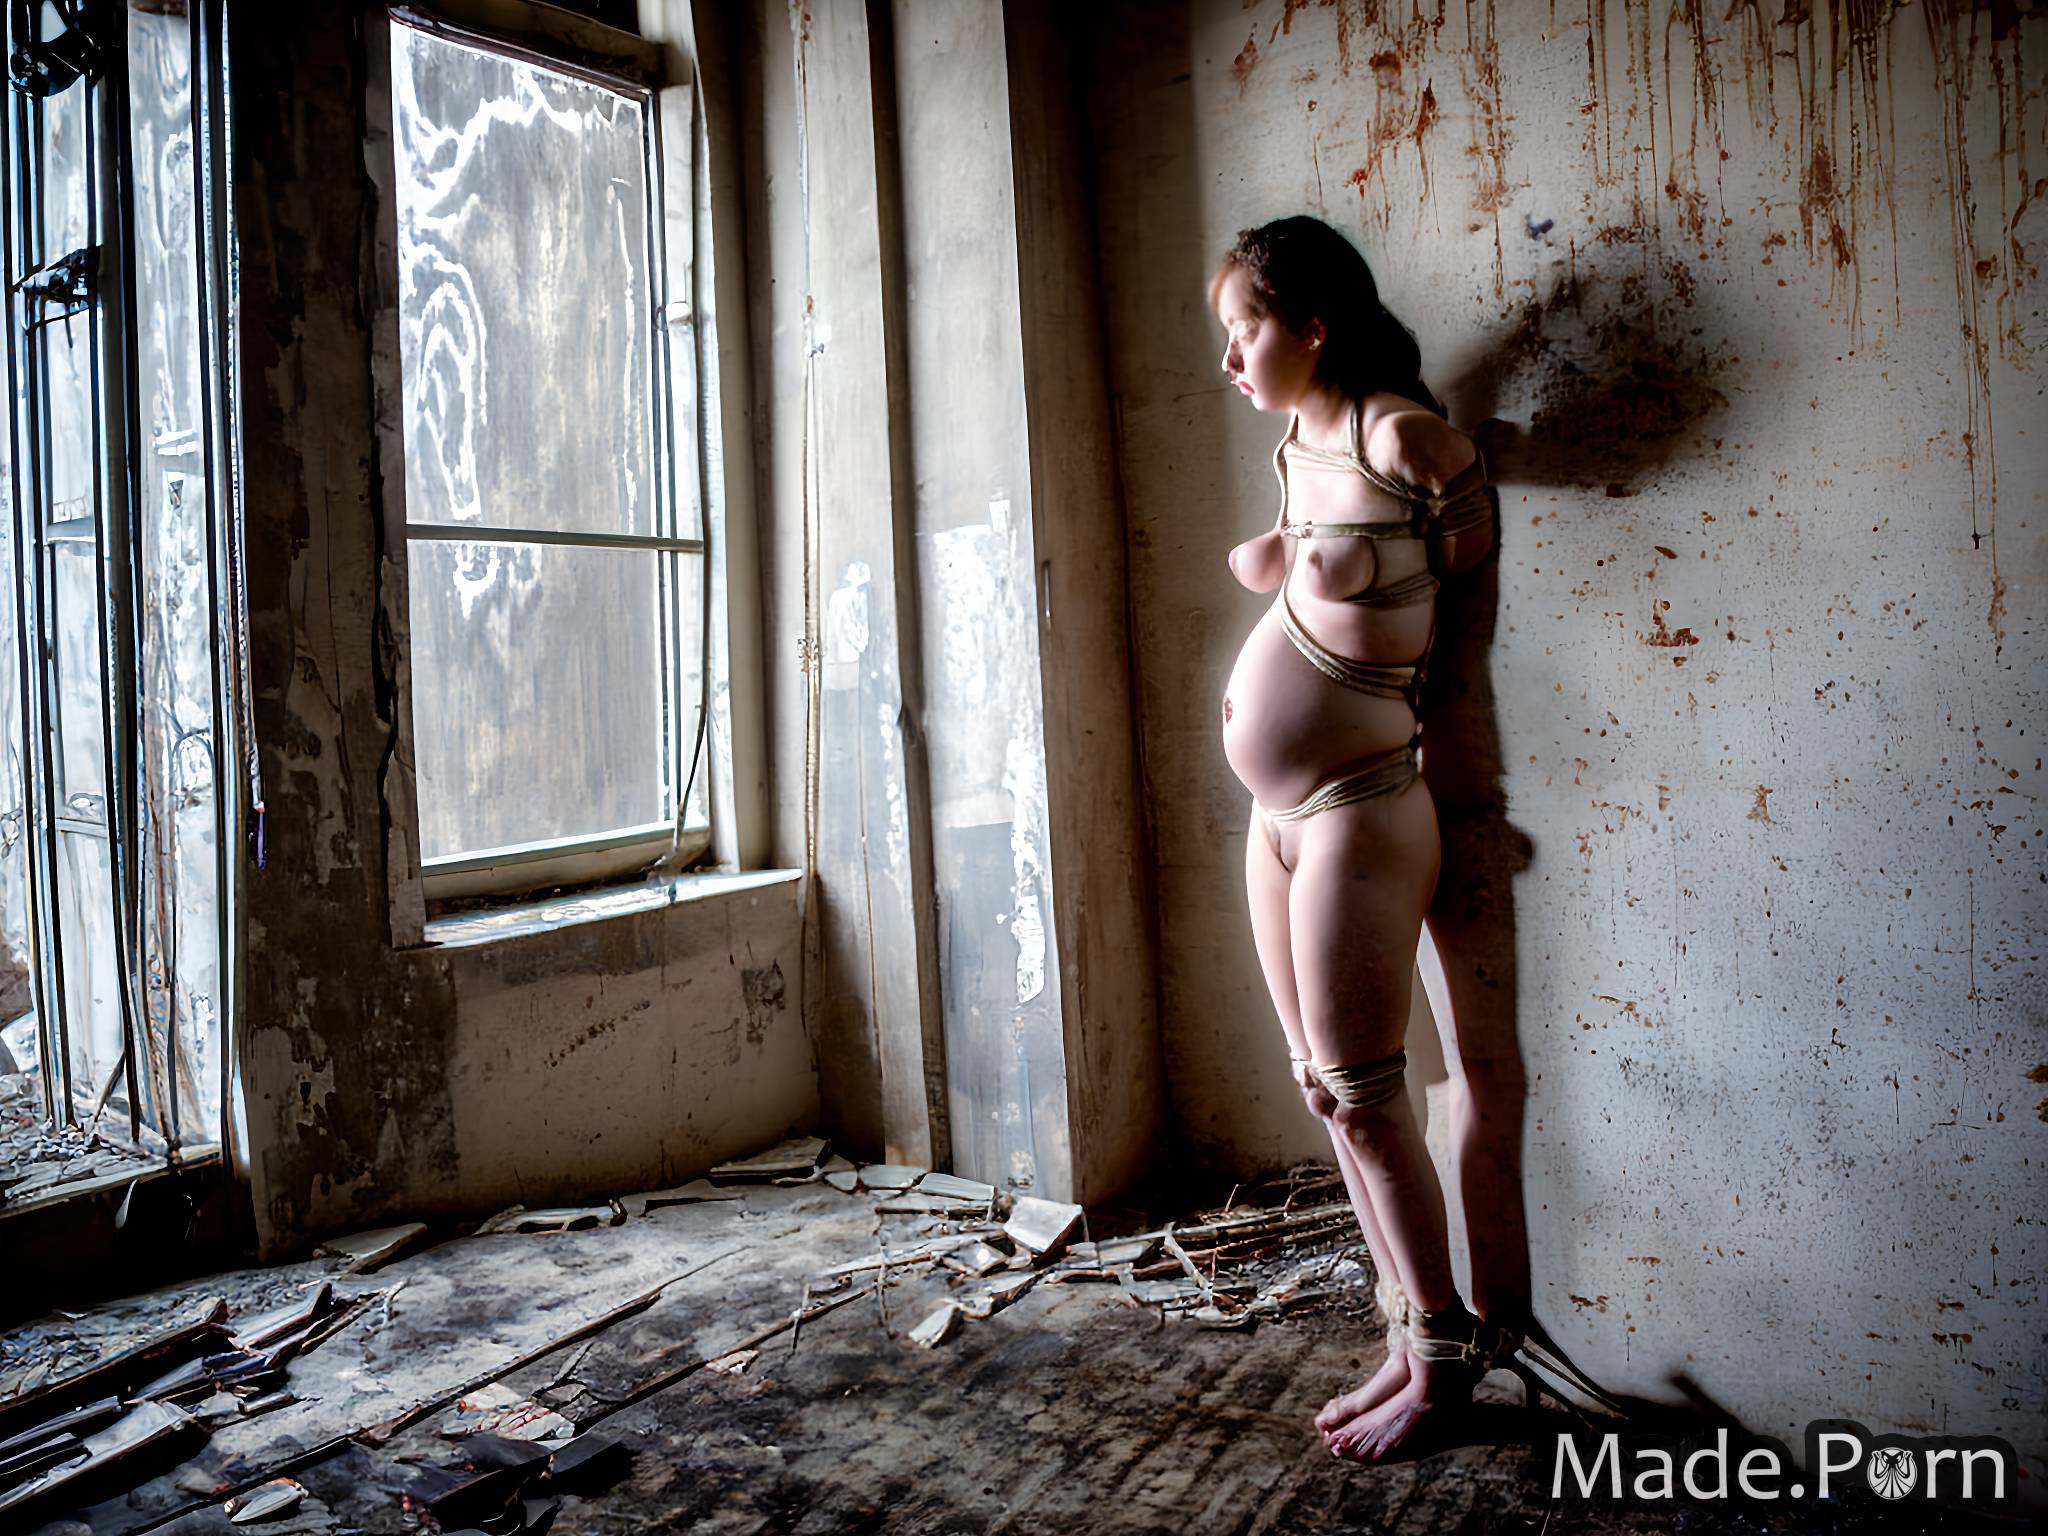 Abandoned Nudes - Porn image of pregnant nude abandoned building 18 bondage woman vintage  created by AI